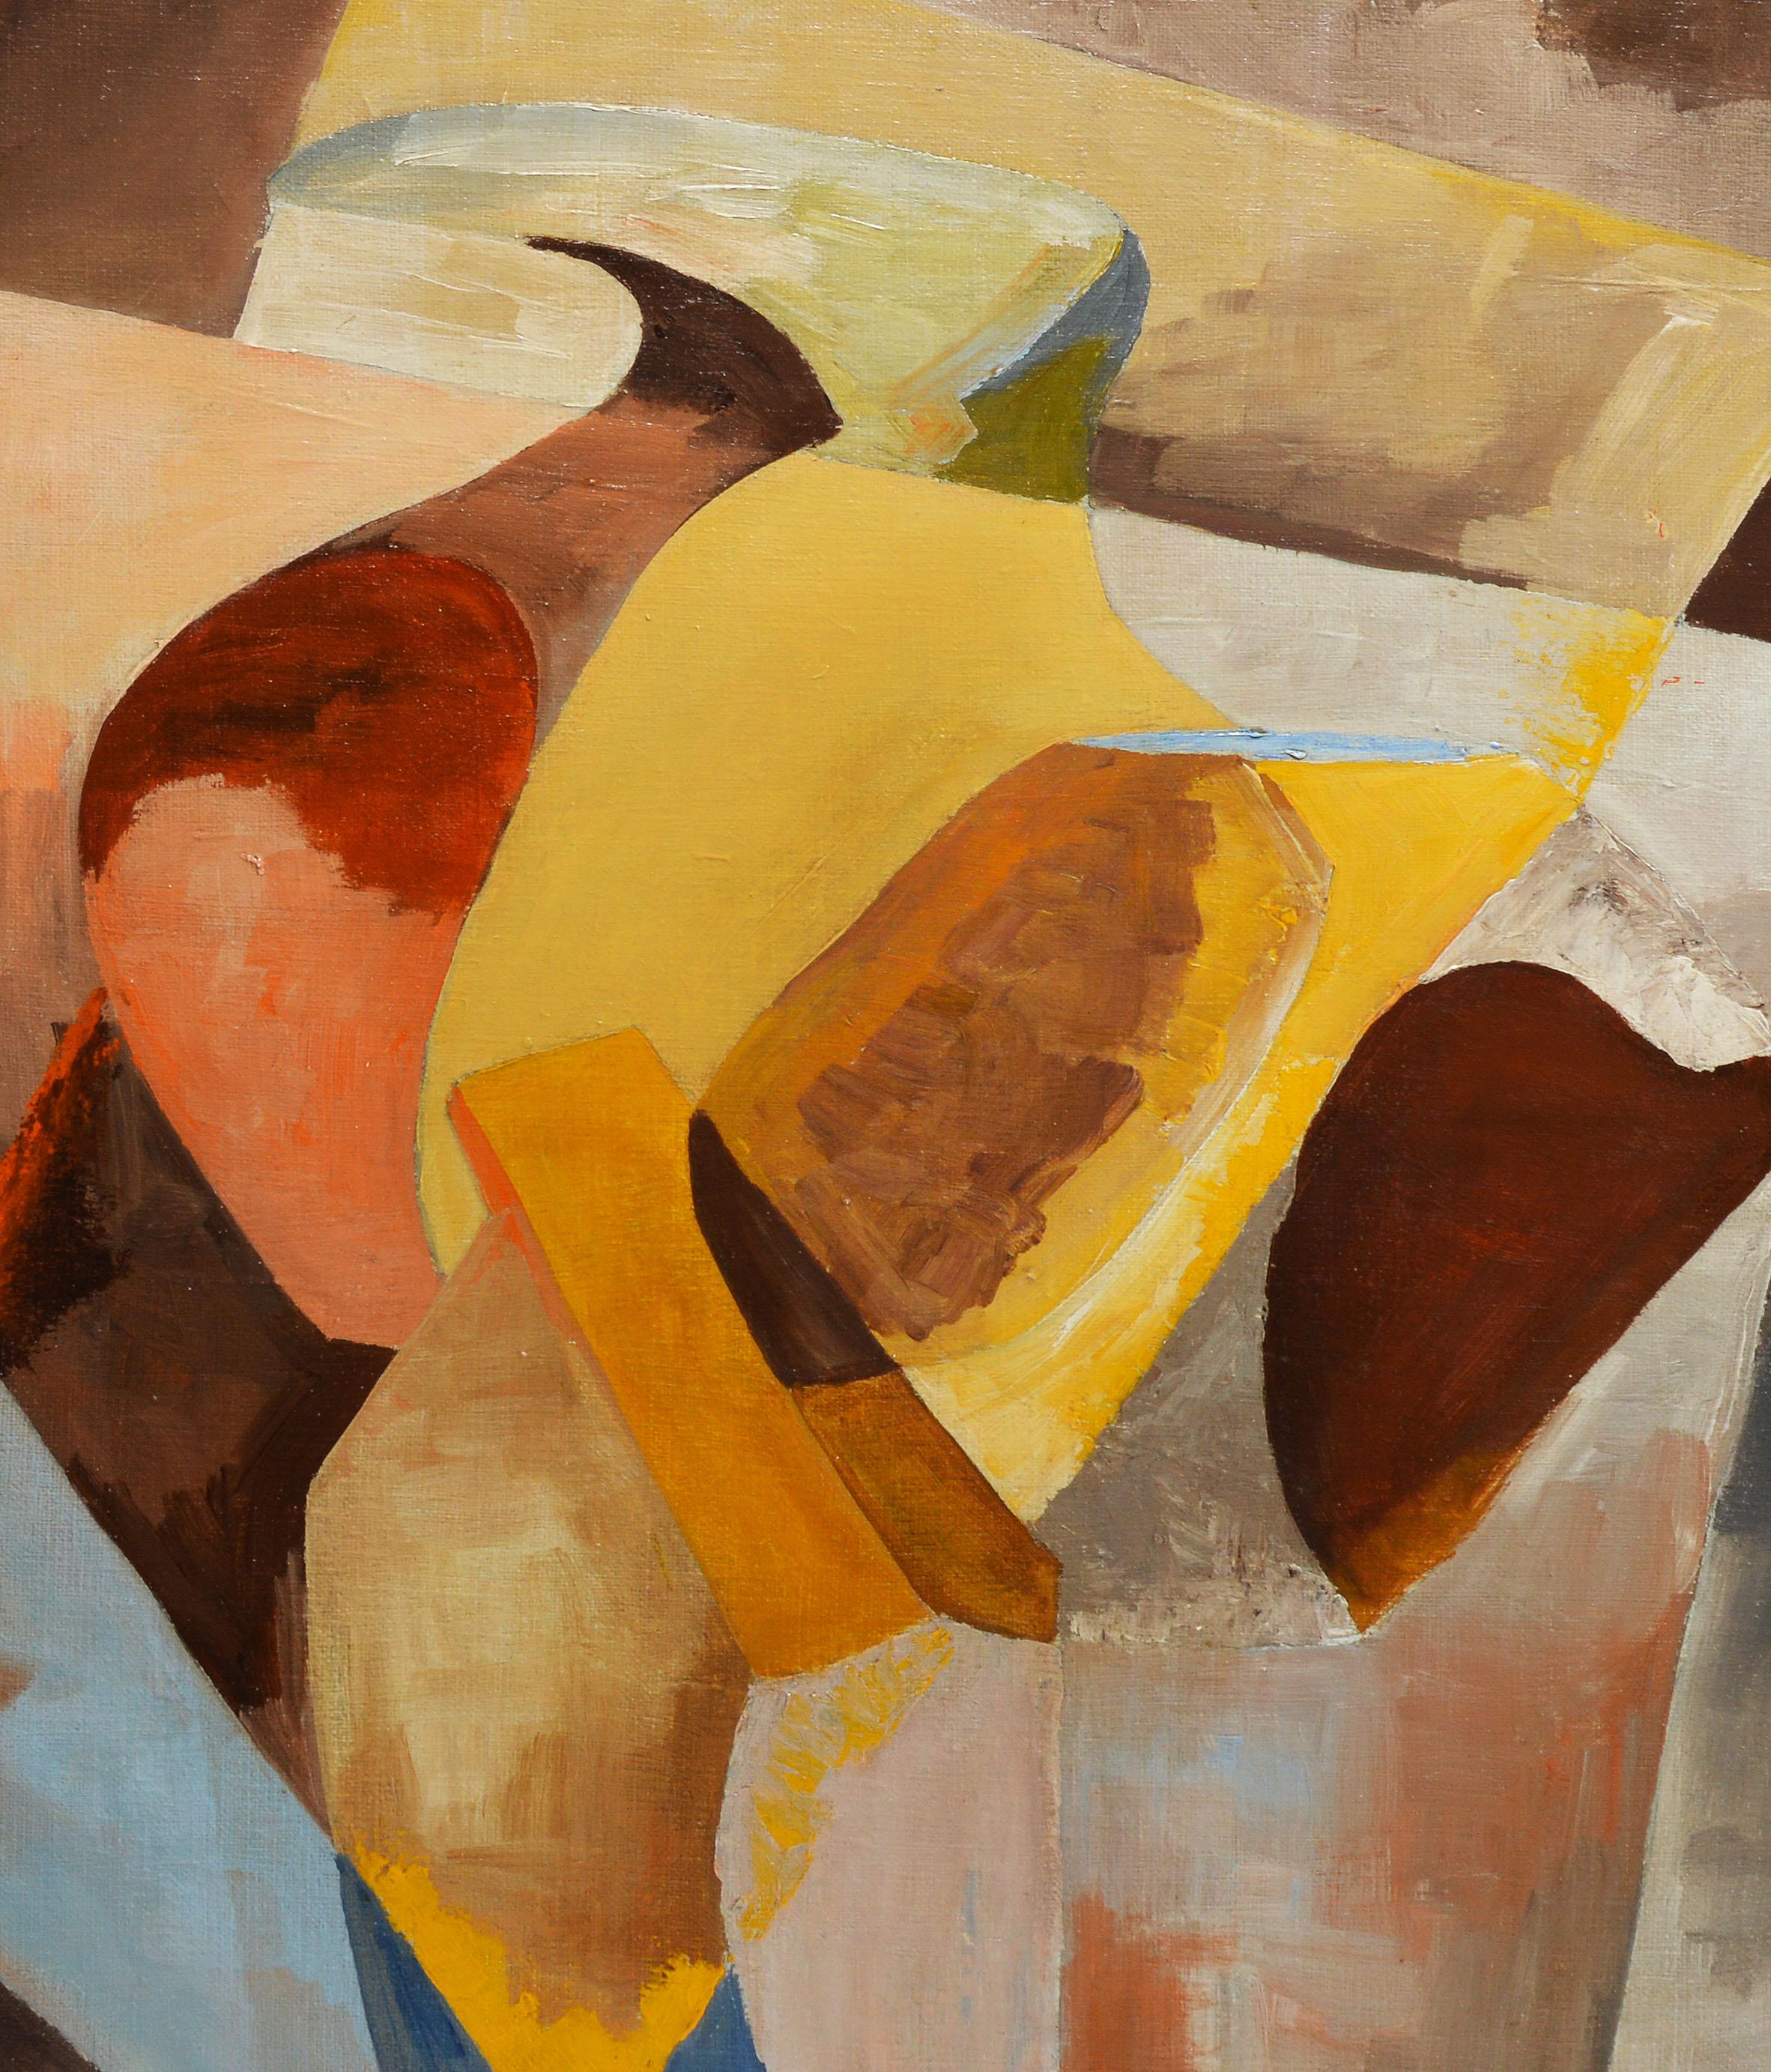 Abstract composition by P.T. Schell Jr.  Oil on canvas, circa 1972.  Signed lower left.  Unframed.  Image size, 22